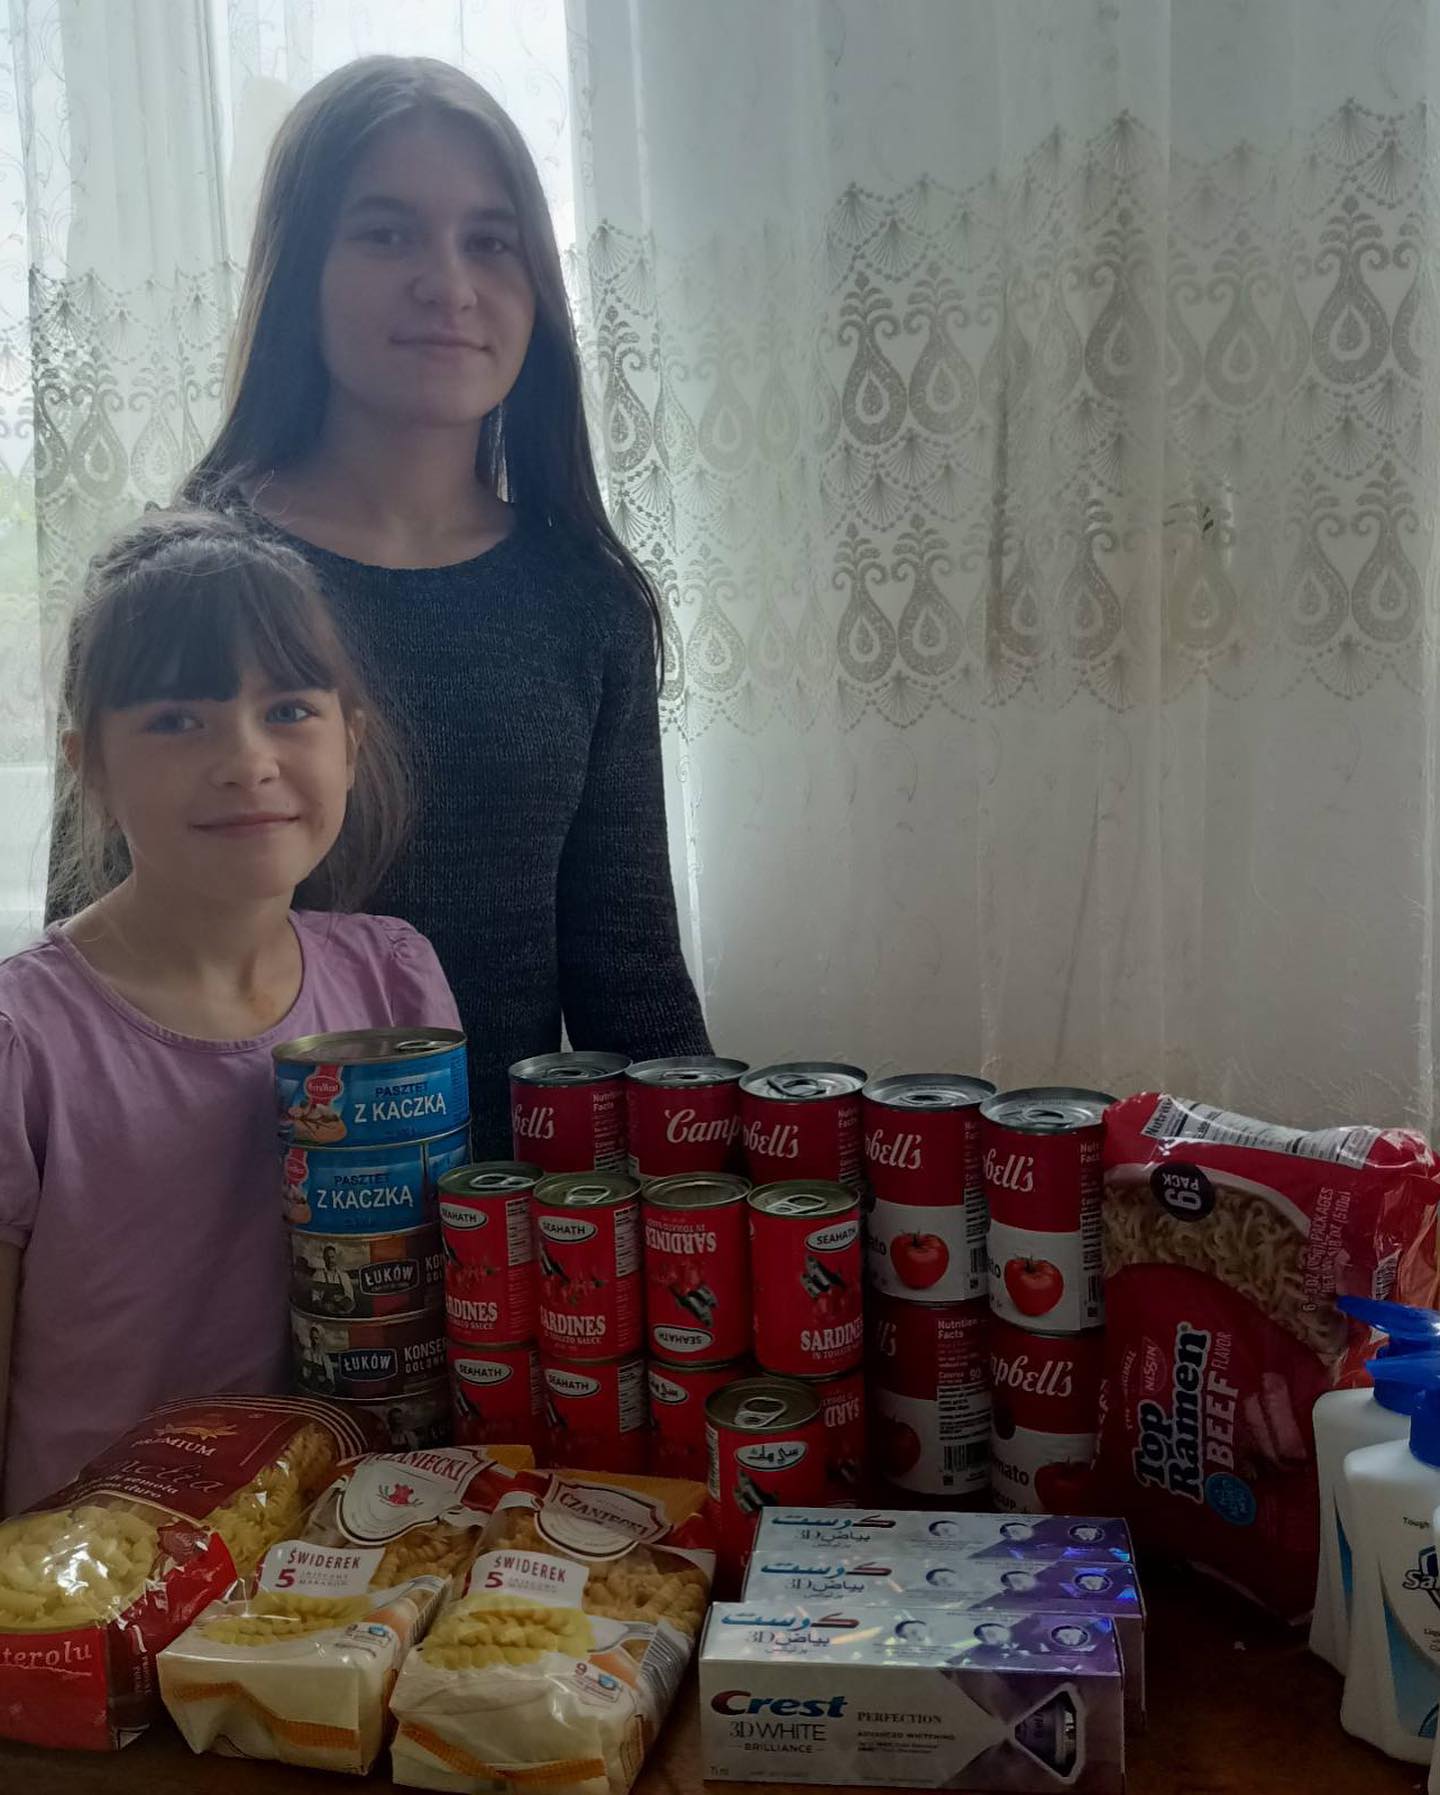 Two young girls standing next to a table full of food.